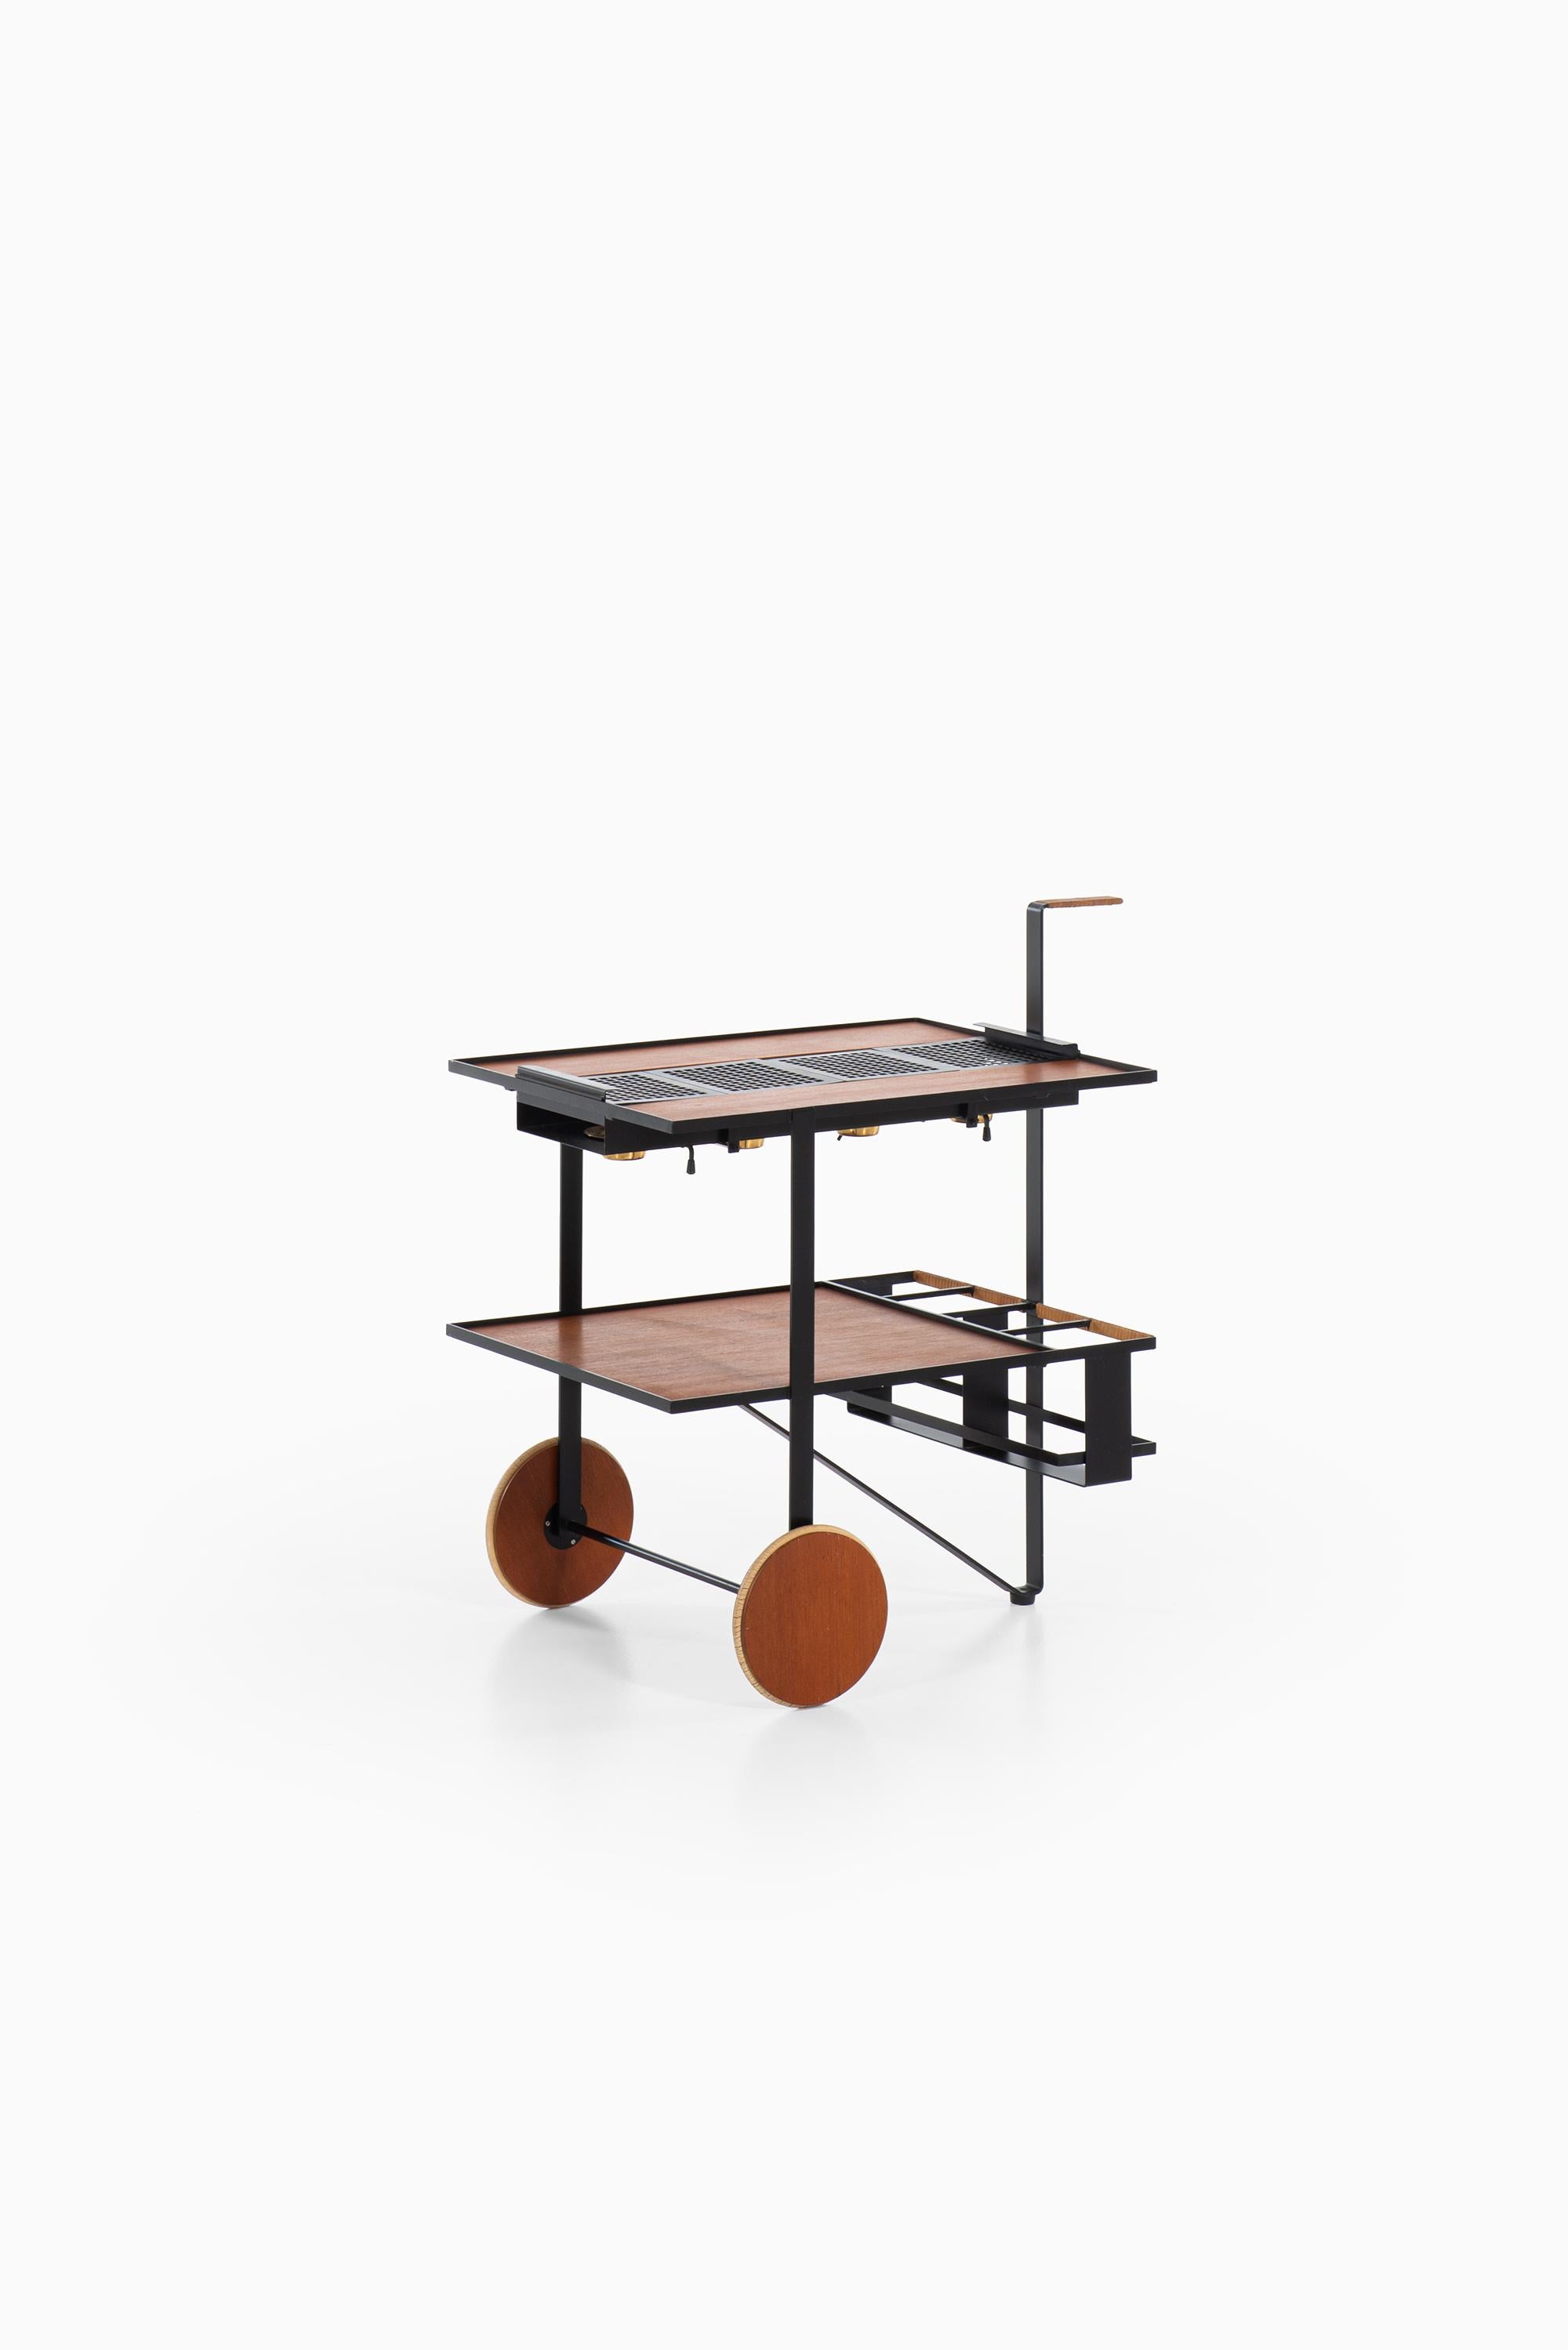 Brass Cees Braakman Trolley Produced by UMS Pastoe in Netherlands